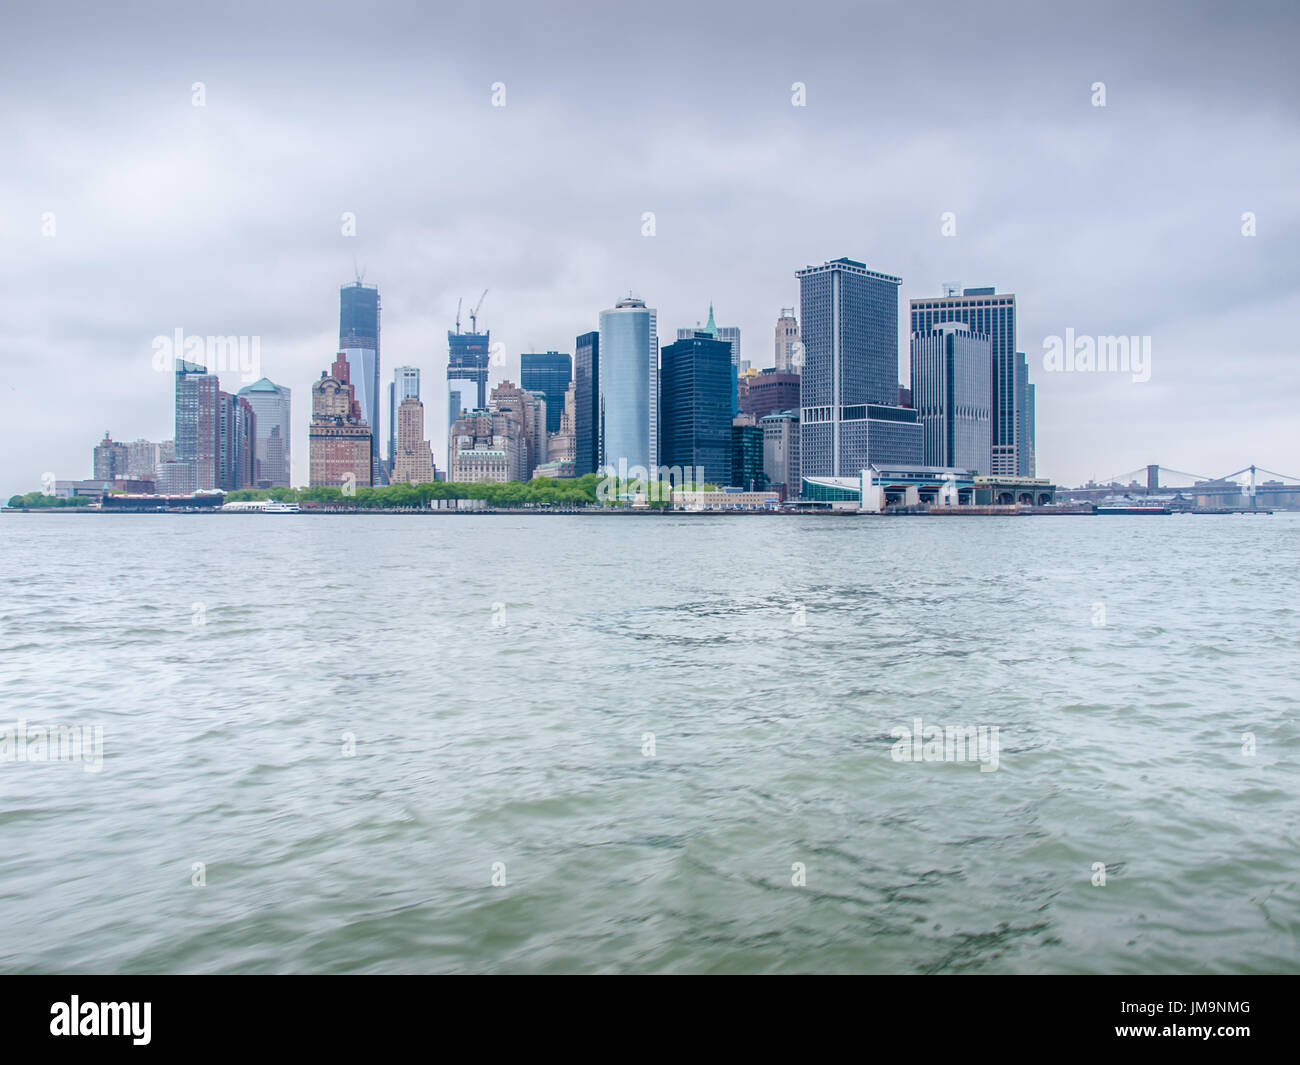 Manhattan Island from the River Stock Photo